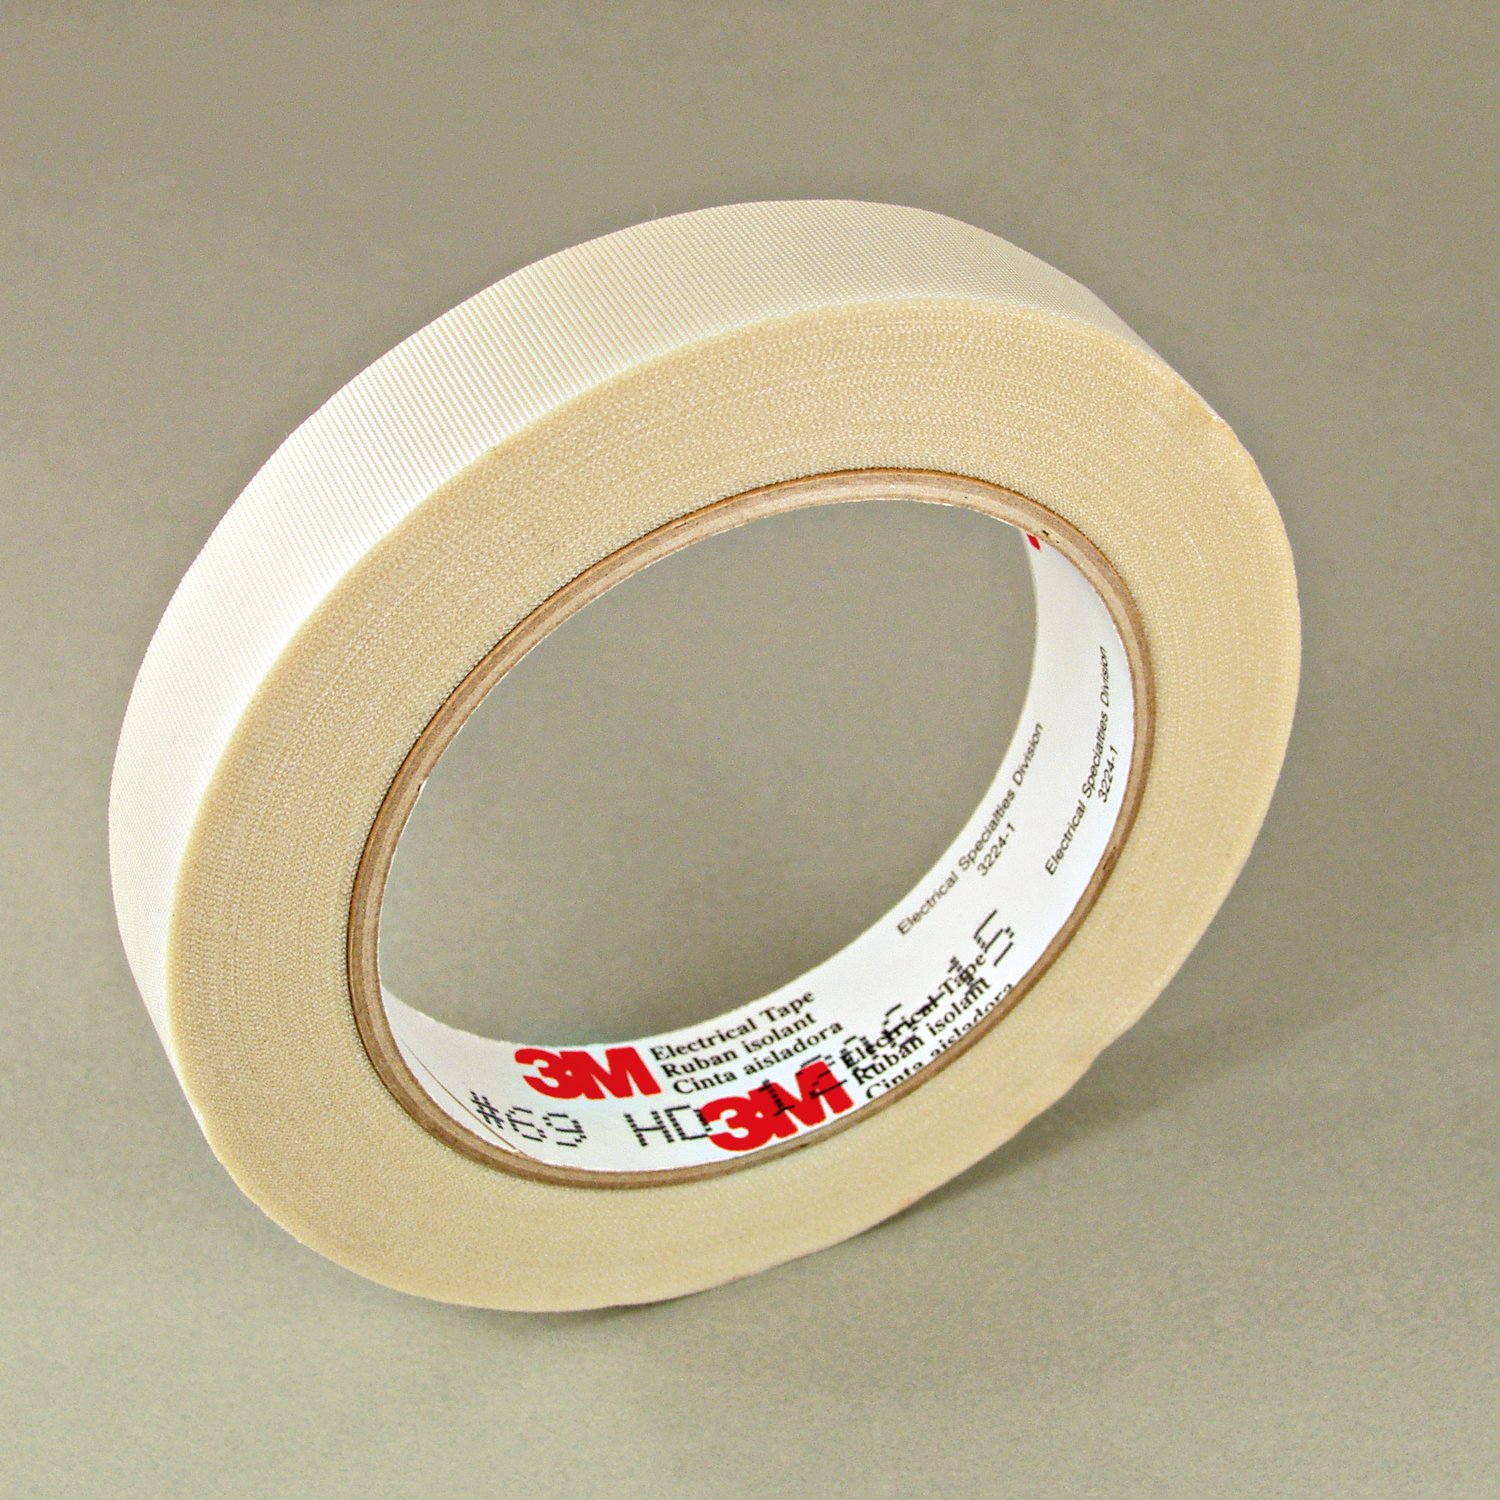 1/4" 3M 69 Glass Cloth Electrical Tape (3M69) with Silicone Adhesive 180°C, white, 1/4" wide x  36 YD roll